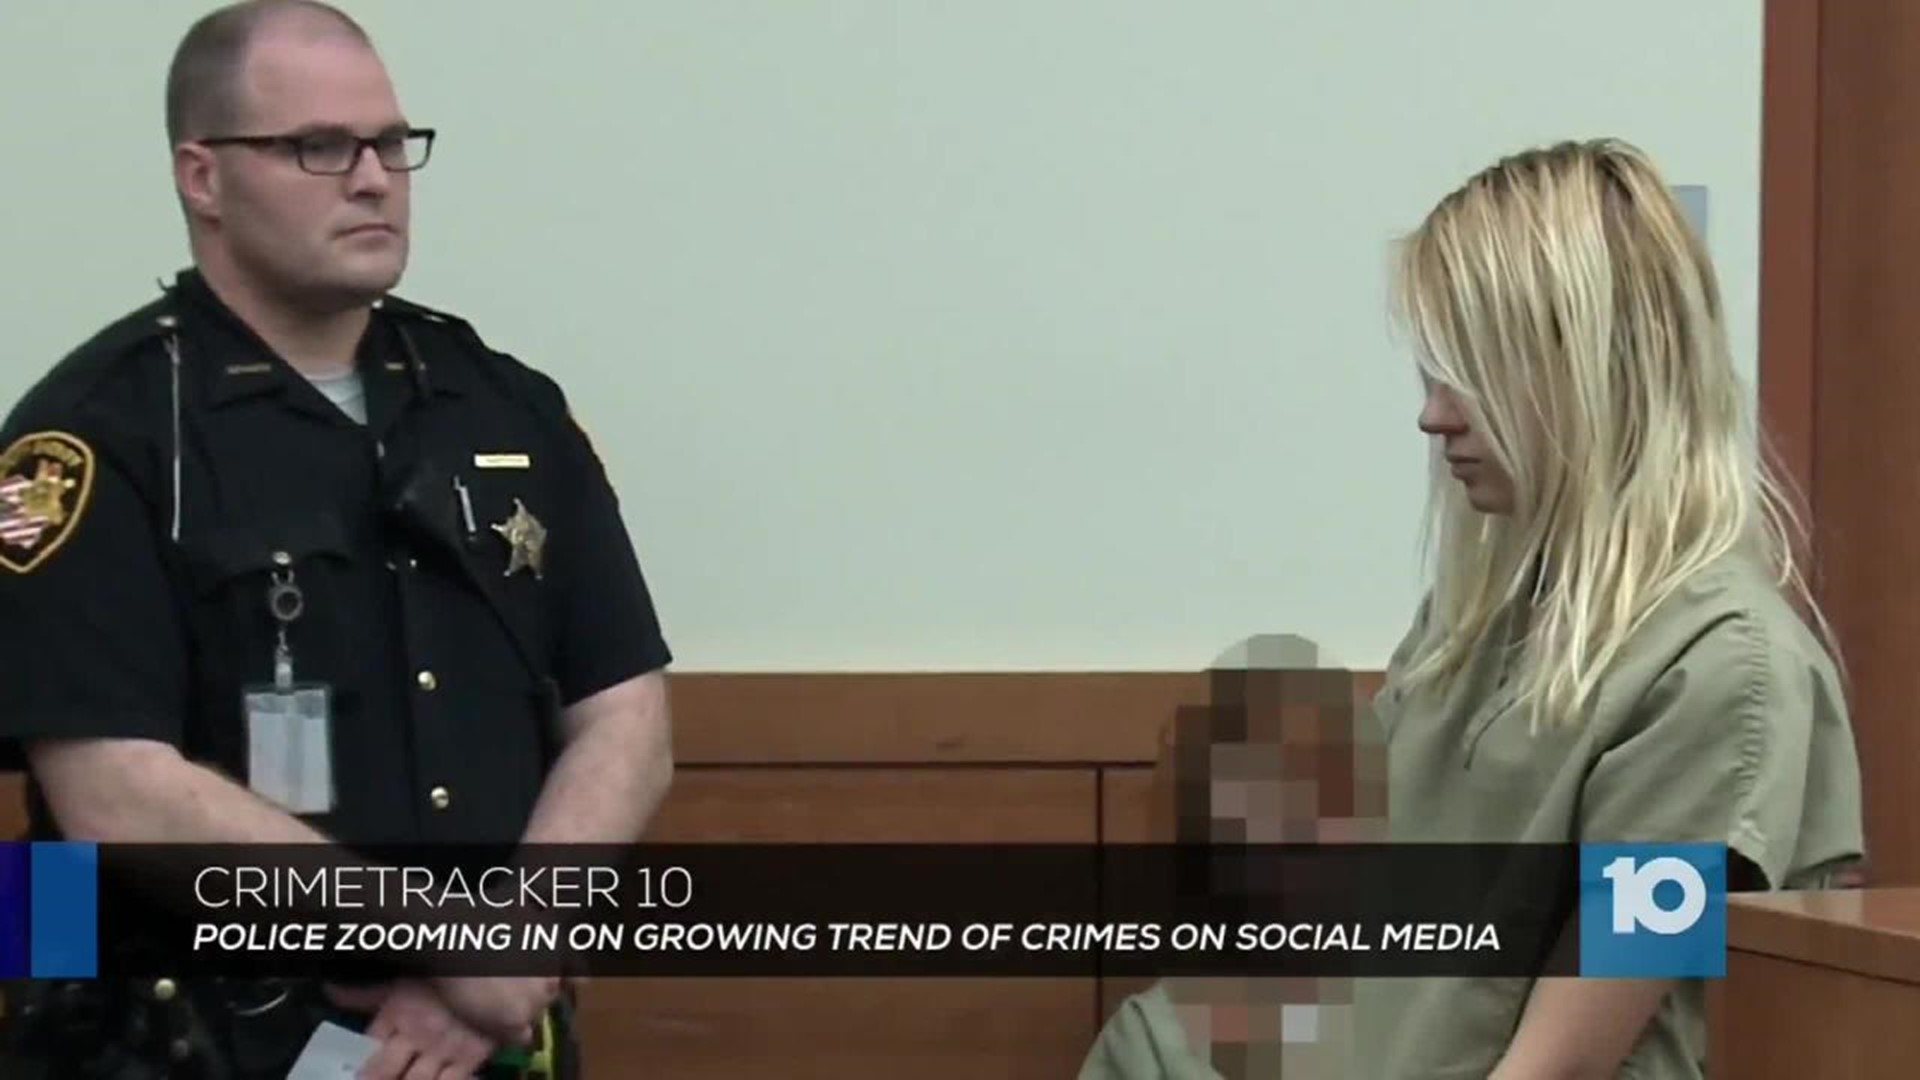 Man Accused In Rape Livestreamed On Periscope Sentenced To 9 Years